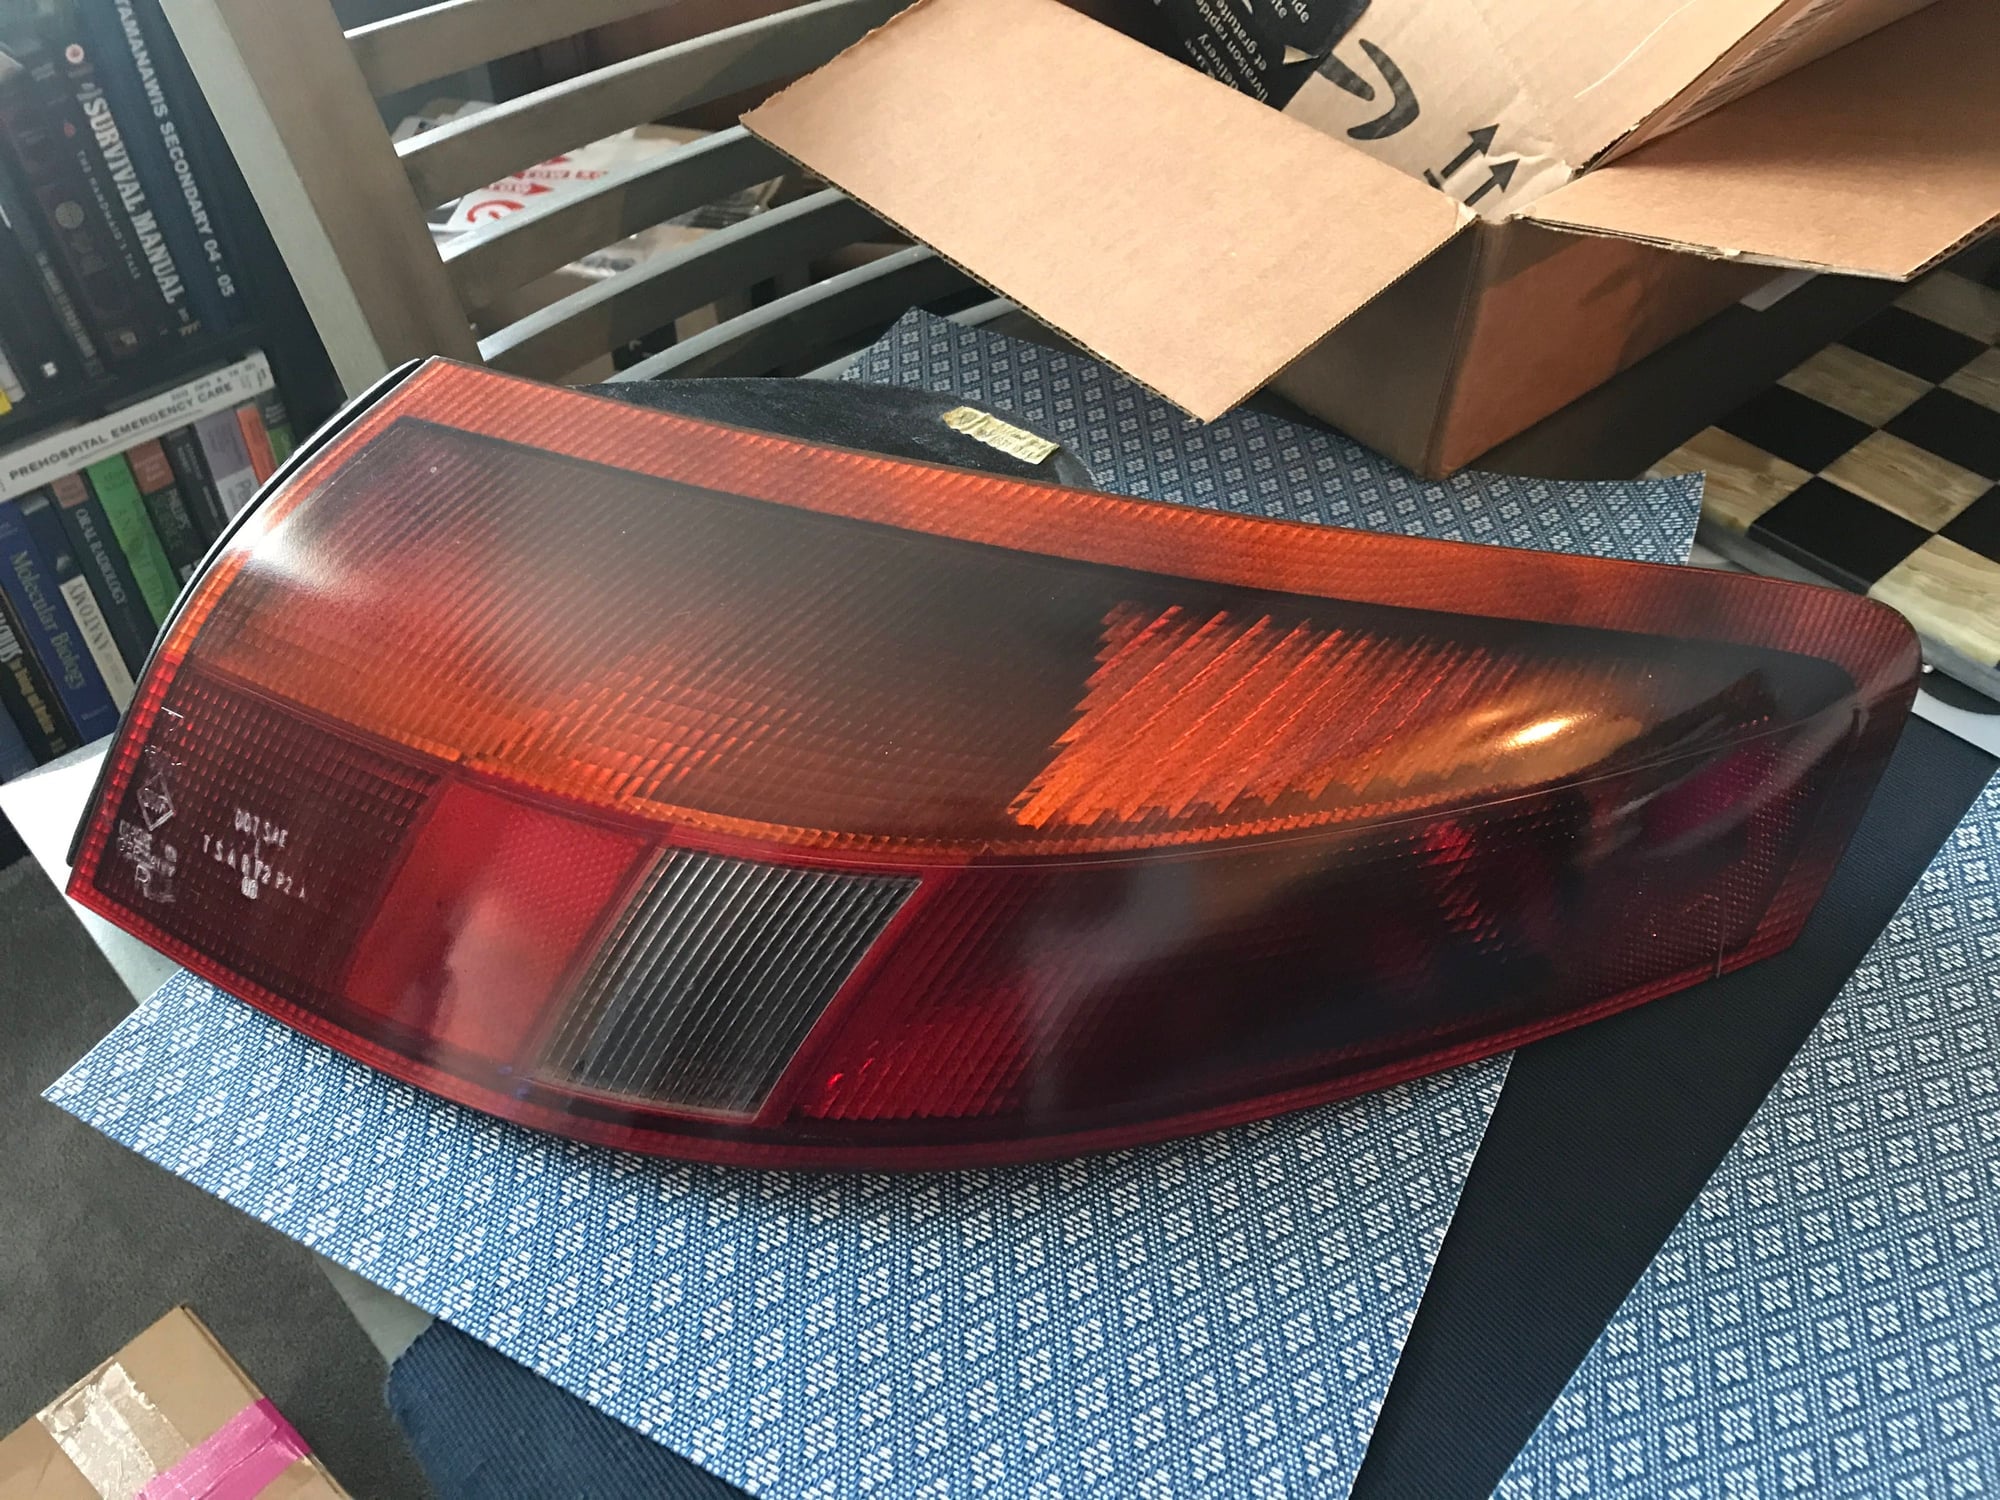 Lights - 996.1 - Rear Ambers and AOS For Sale! - Used - 1999 to 2001 Porsche 911 - Victoria, BC V9A6Z3, Canada